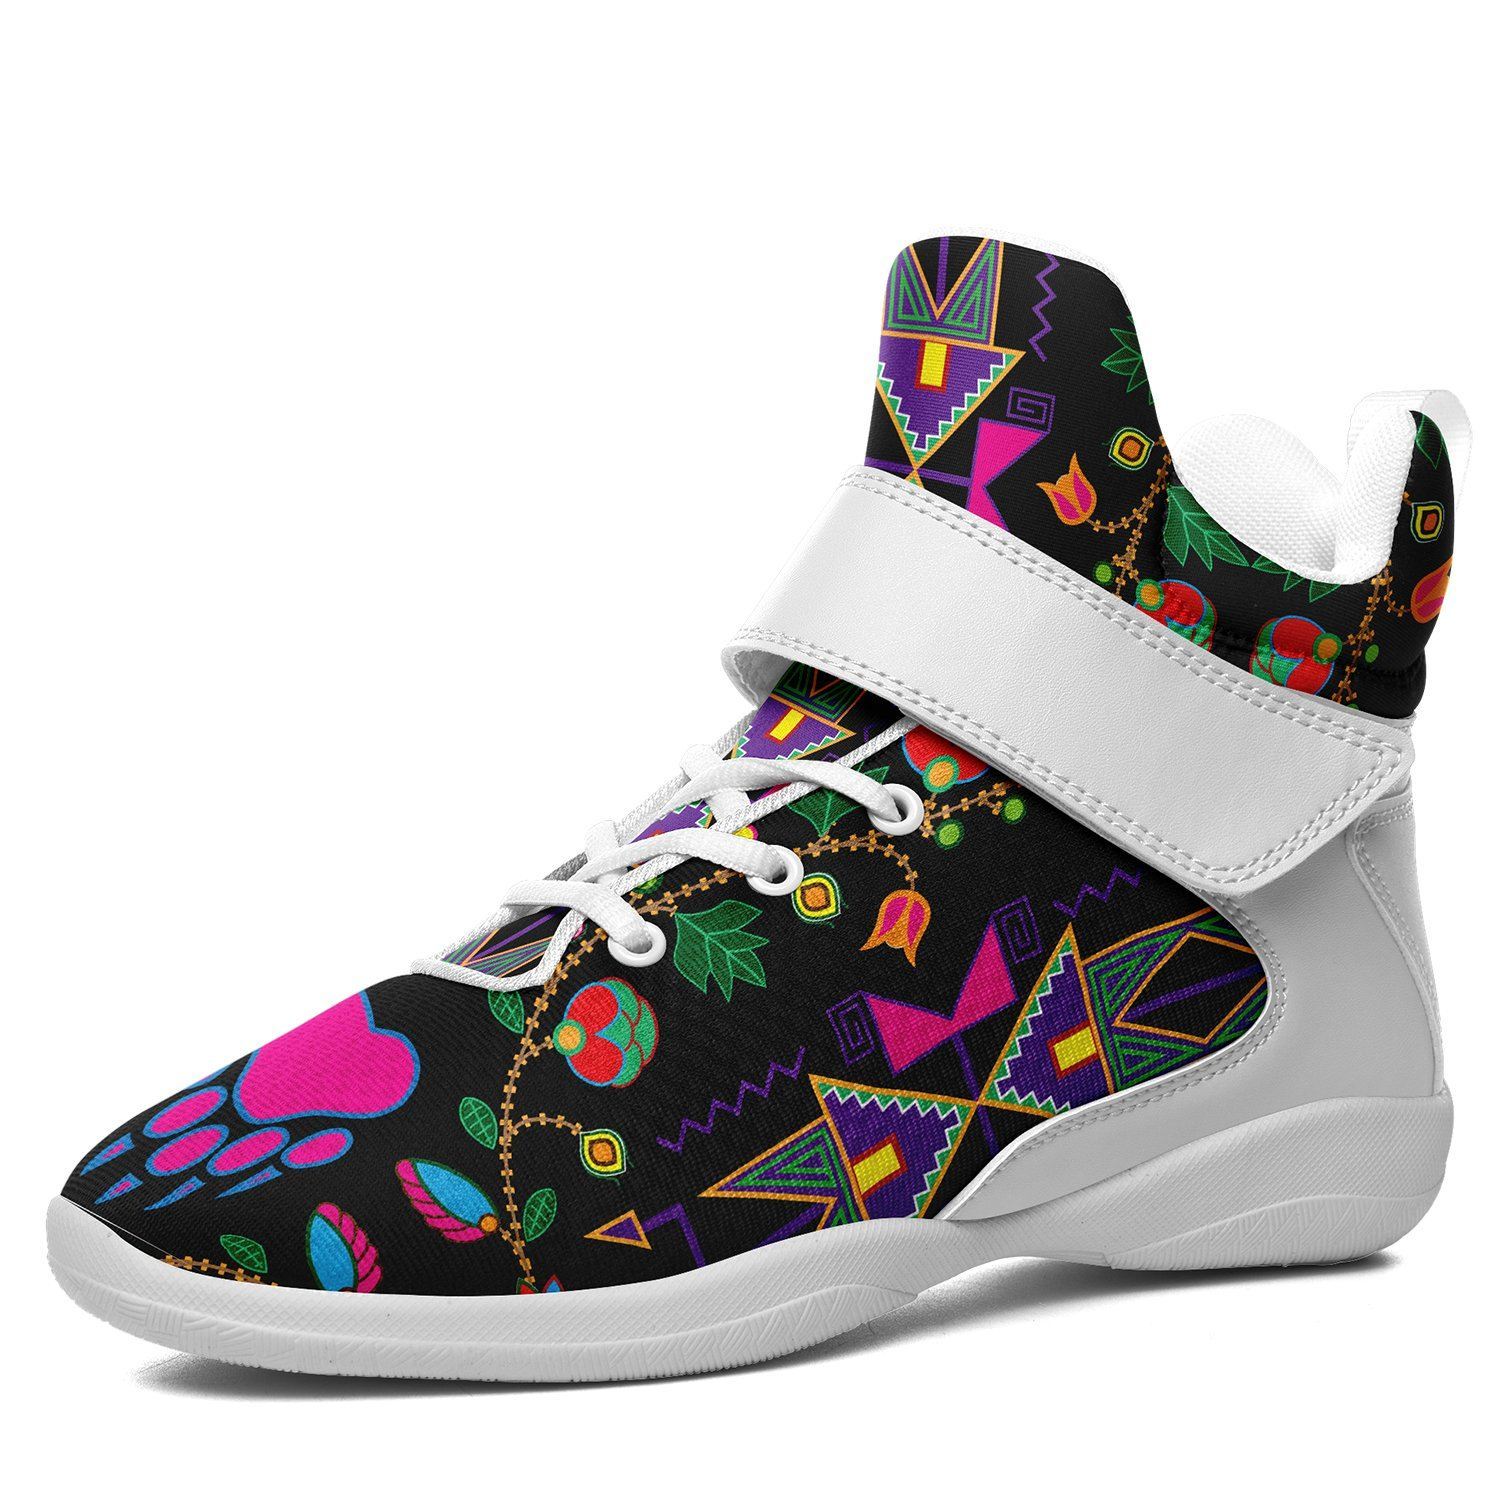 Geometric Floral Fall Black Kid's Ipottaa Basketball / Sport High Top Shoes 49 Dzine US Women 4.5 / US Youth 3.5 / EUR 35 White Sole with White Strap 